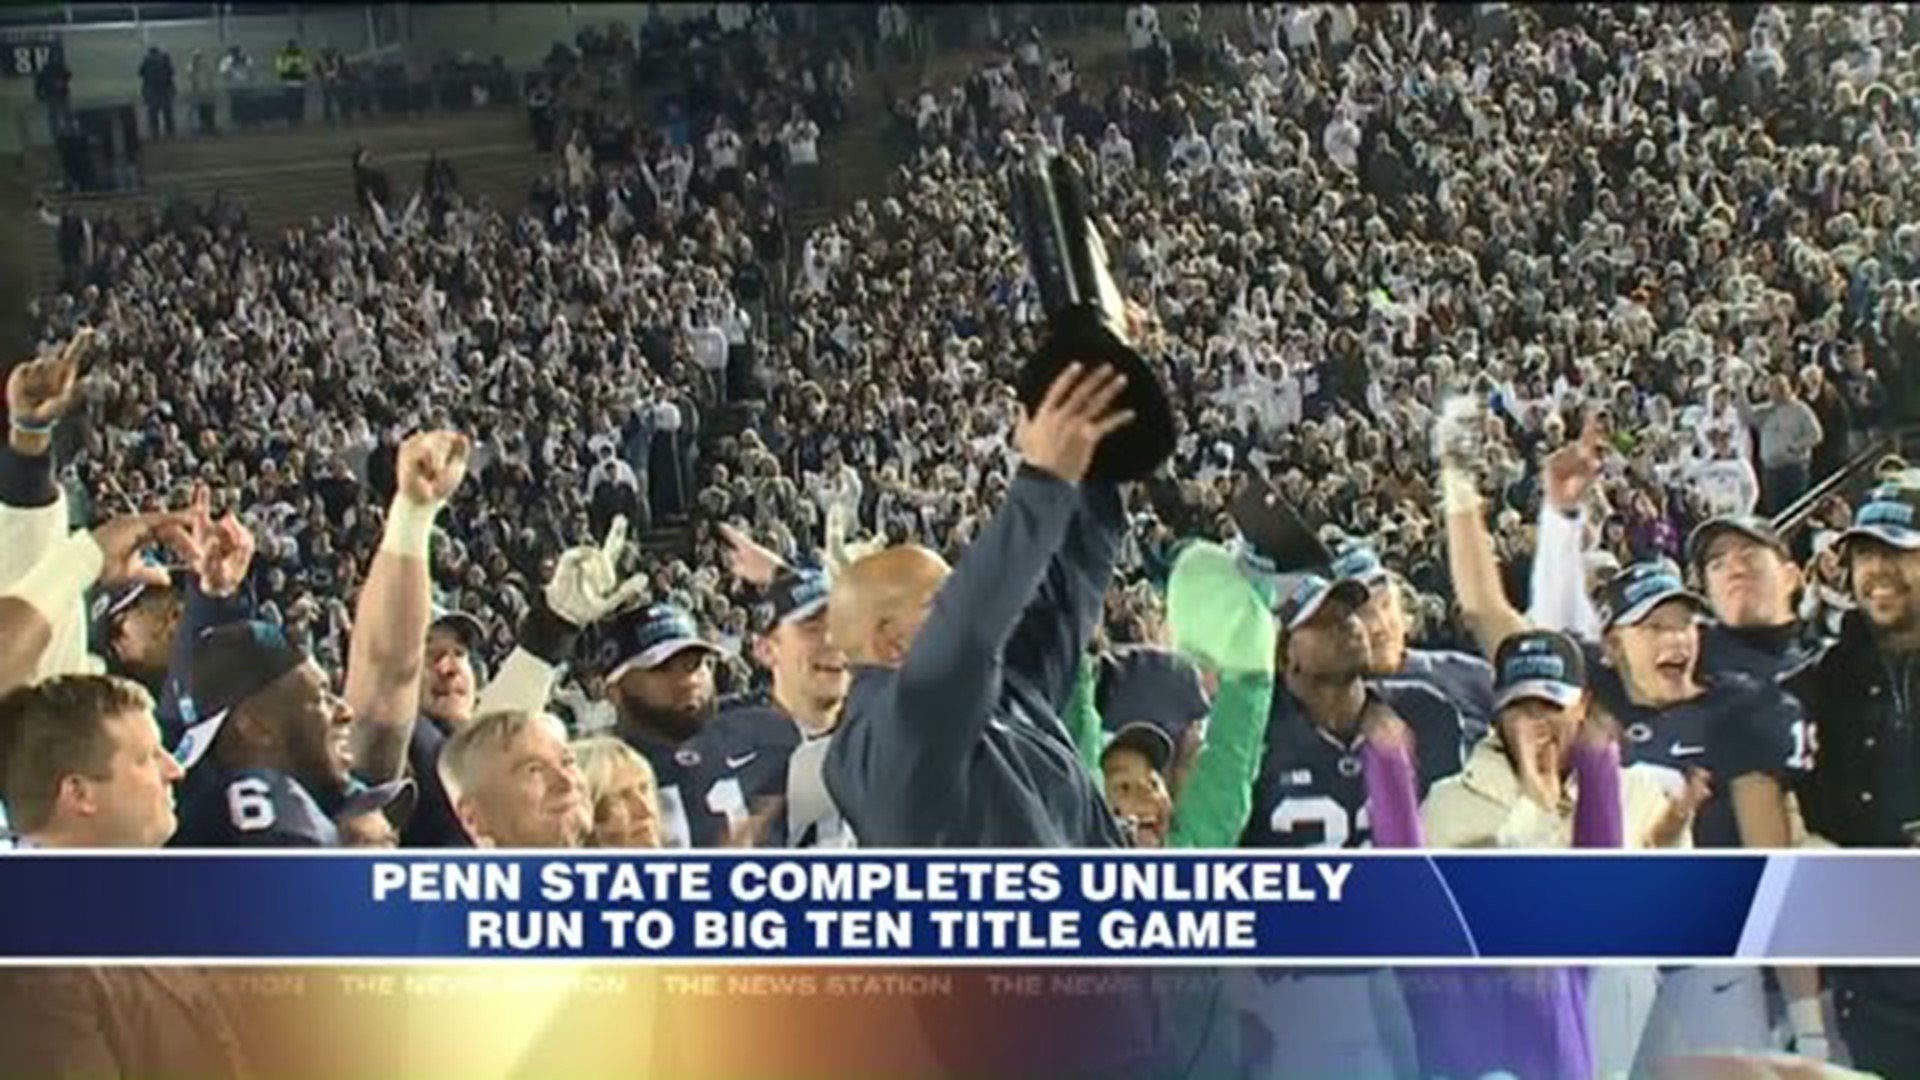 Penn State Completes Improbable Run to B1G Title Game